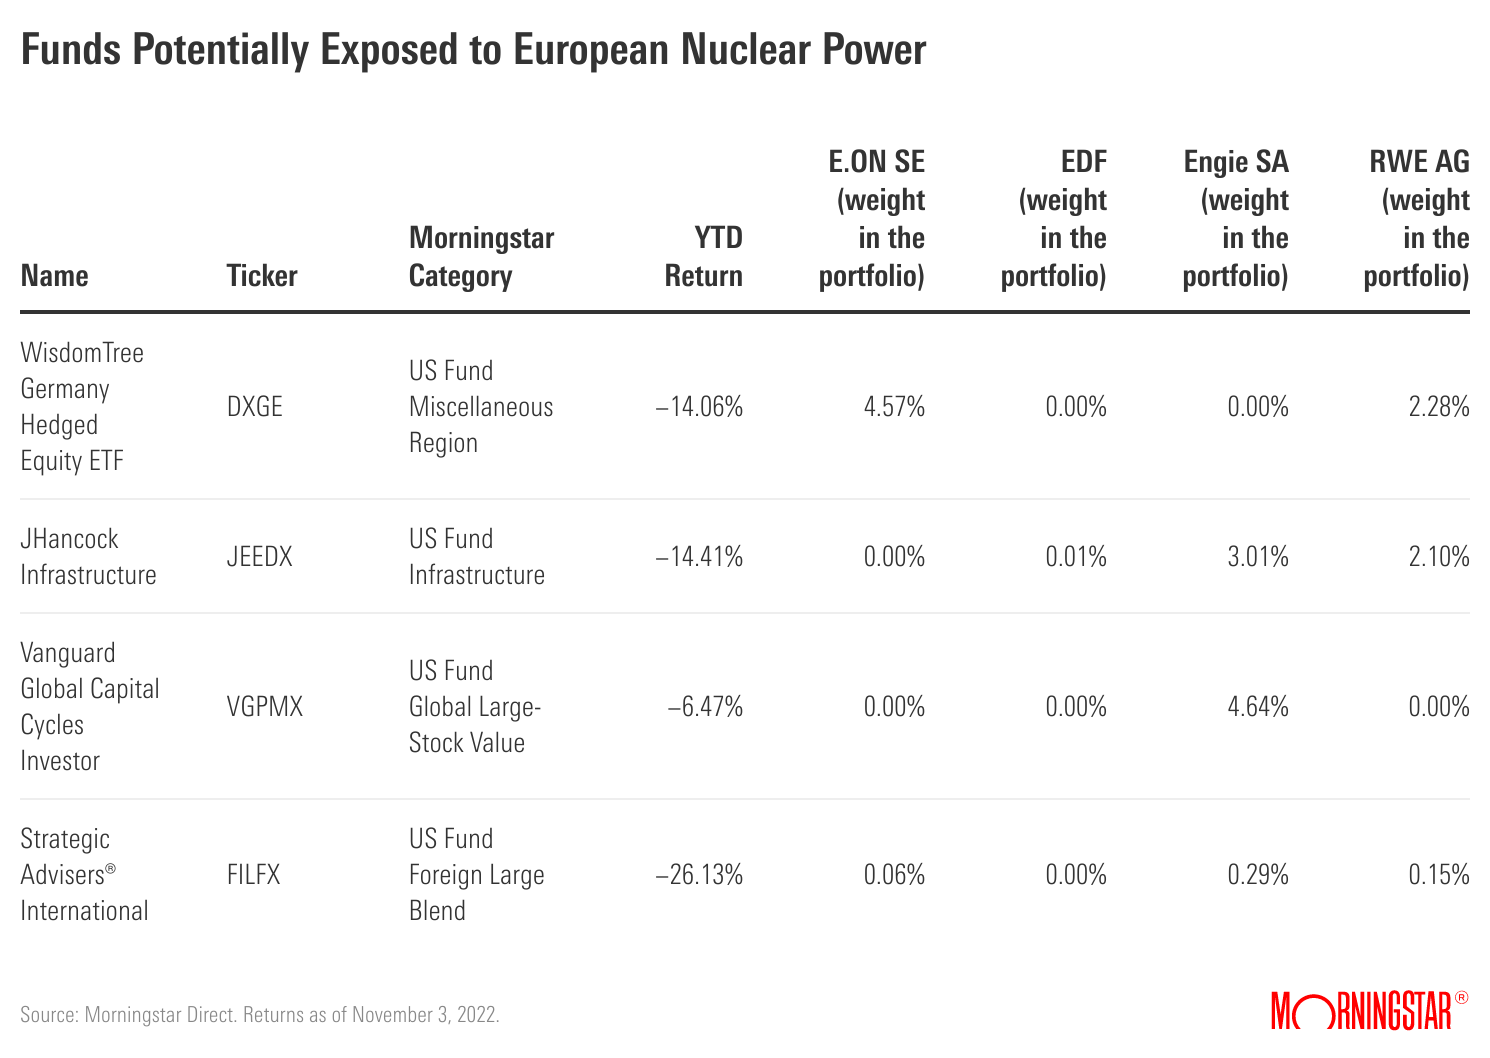 Table showing four major funds potentially exposed to European nuclear power and to what extent.